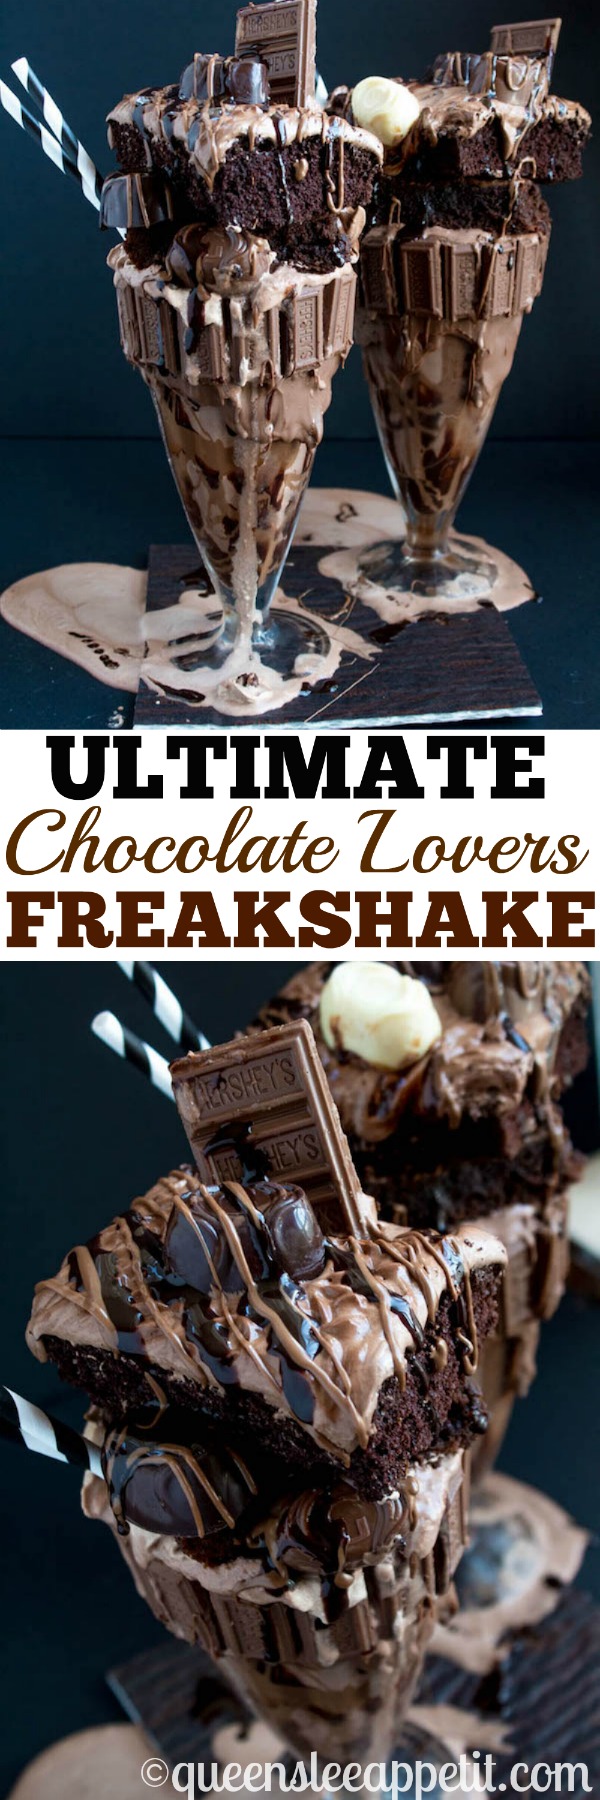 Chocolate Lovers, welcome! This is the chocolatiest, chocolatey, chocolate milkshake of all time. Oops, did I say "milkshake"? I meant FREAKSHAKE! Warning: this recipe is not for the faint of heart.